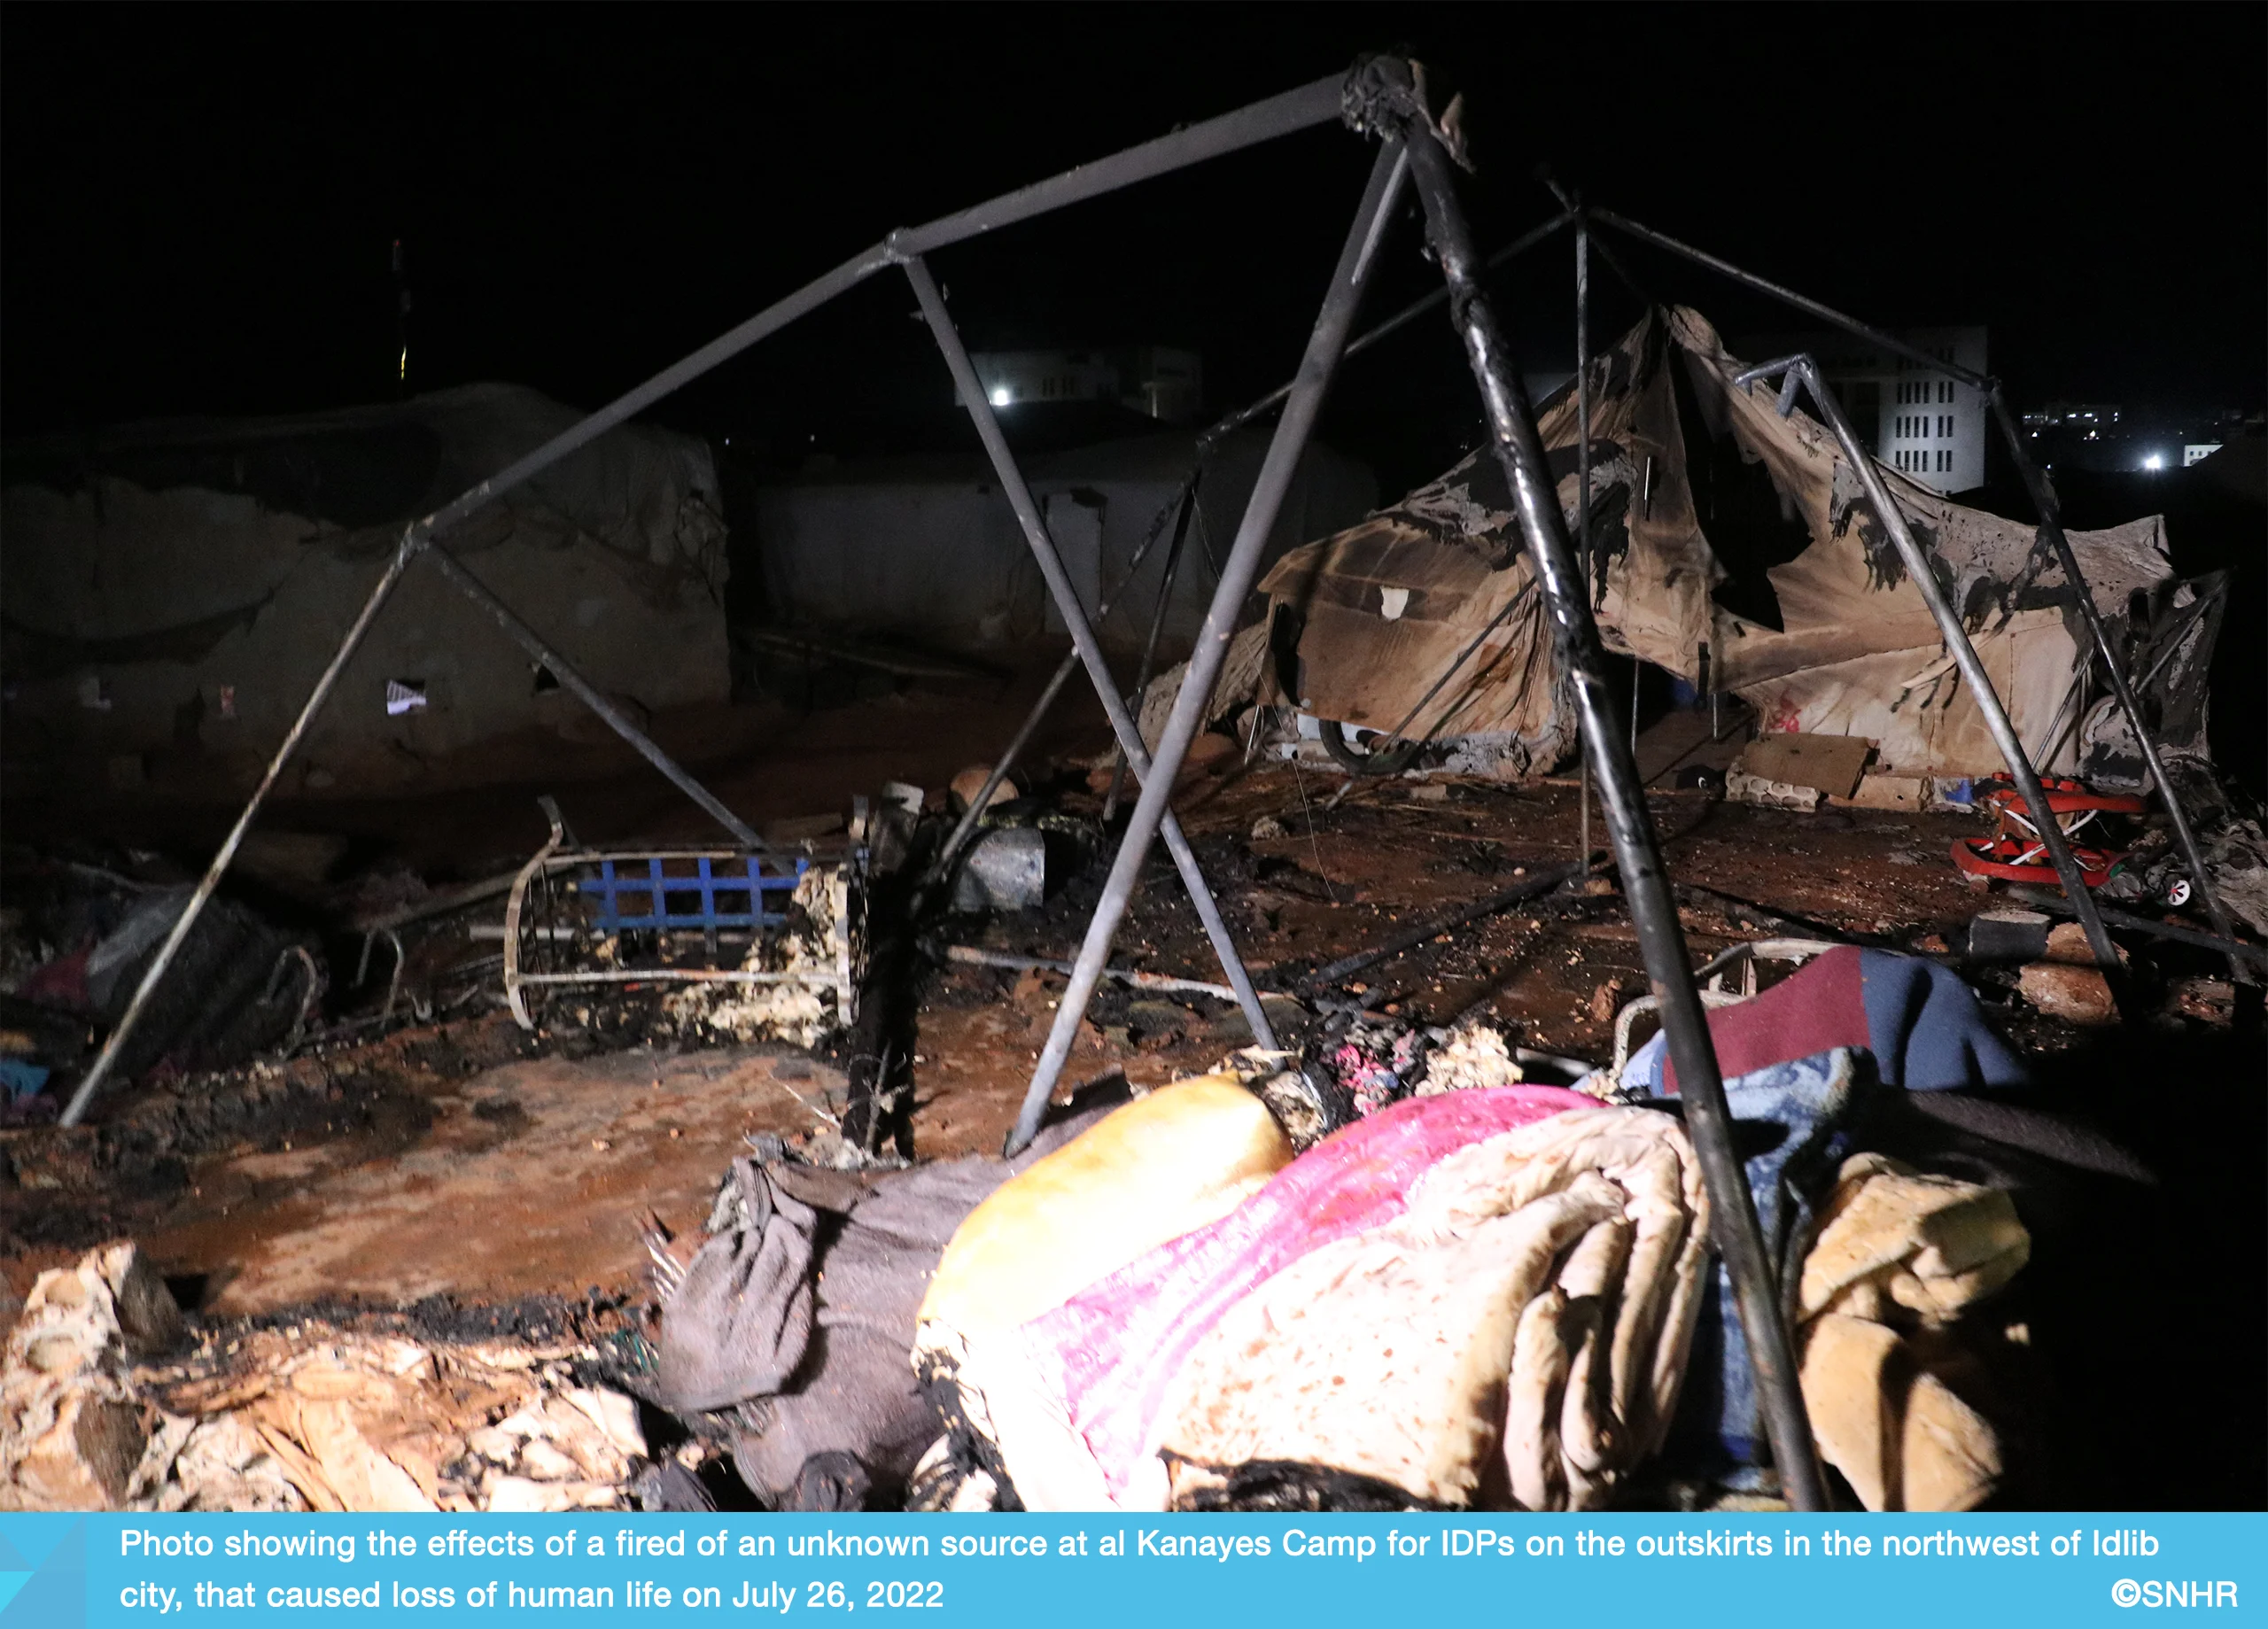 SNHR exclusive photos showing the damage at an IDPs camp in Idlib 26-7-2022 (1)